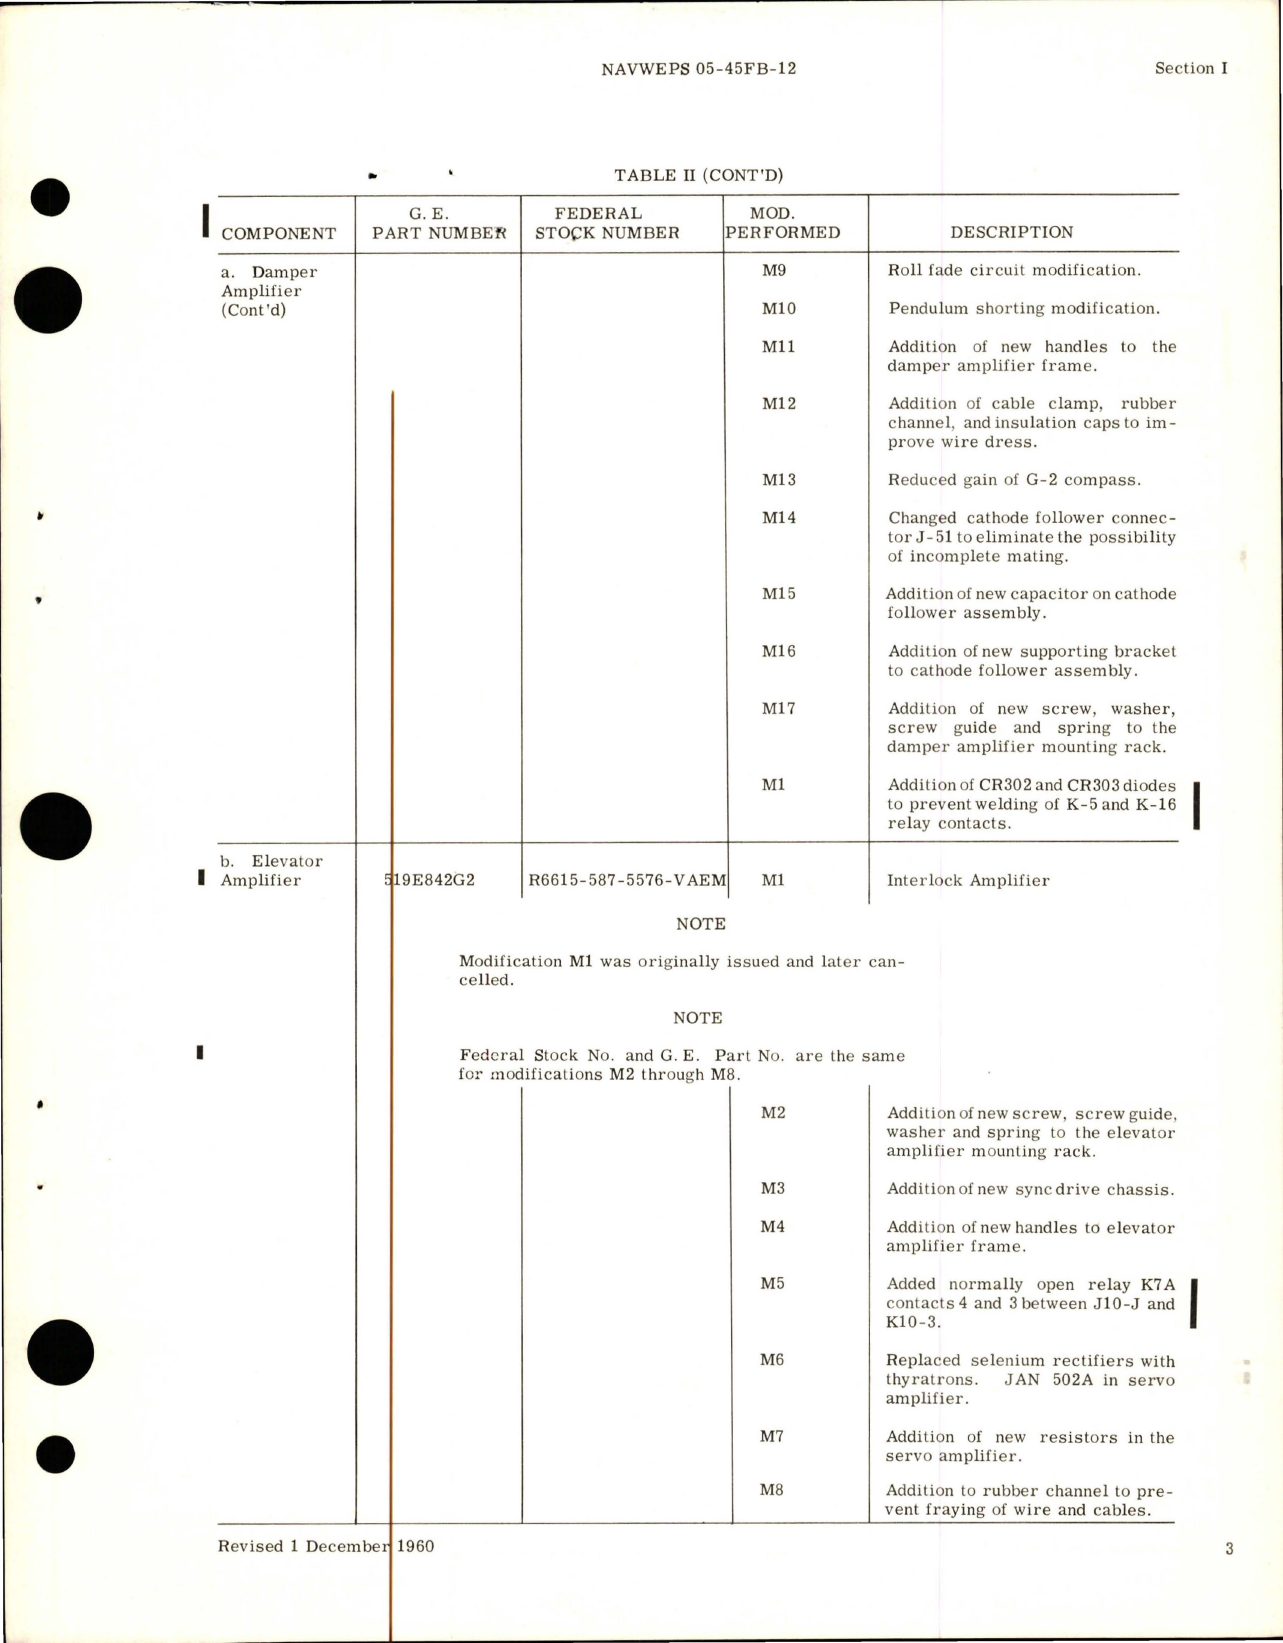 Sample page 5 from AirCorps Library document: Operation and Service Instructions for G-3H Automatic Pilot - Model 2CJ4D1